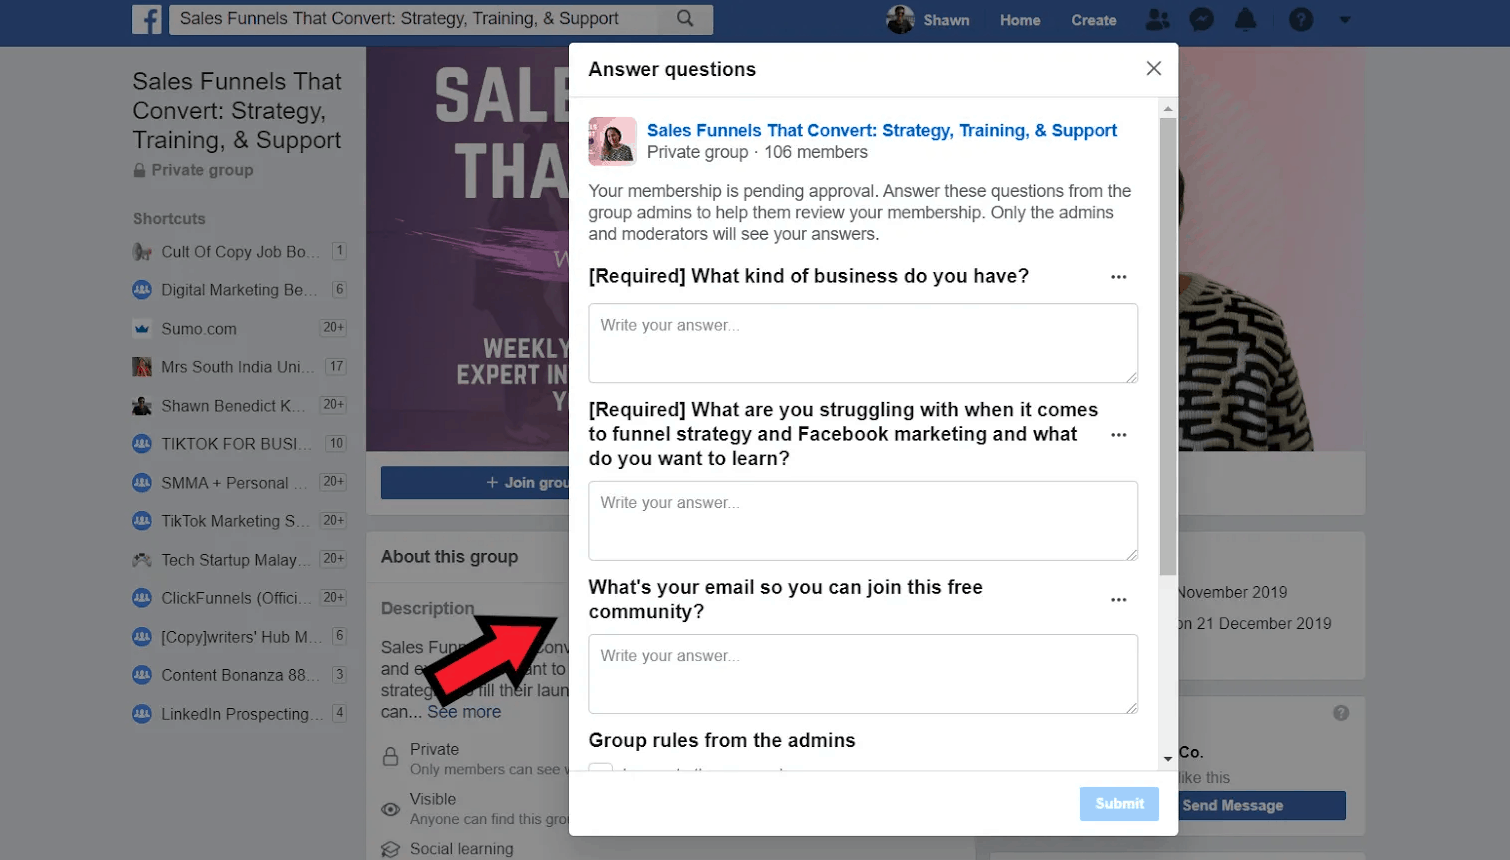 How To Build An Email List: Screenshot of questions to join Facebook group, which includes request for email address